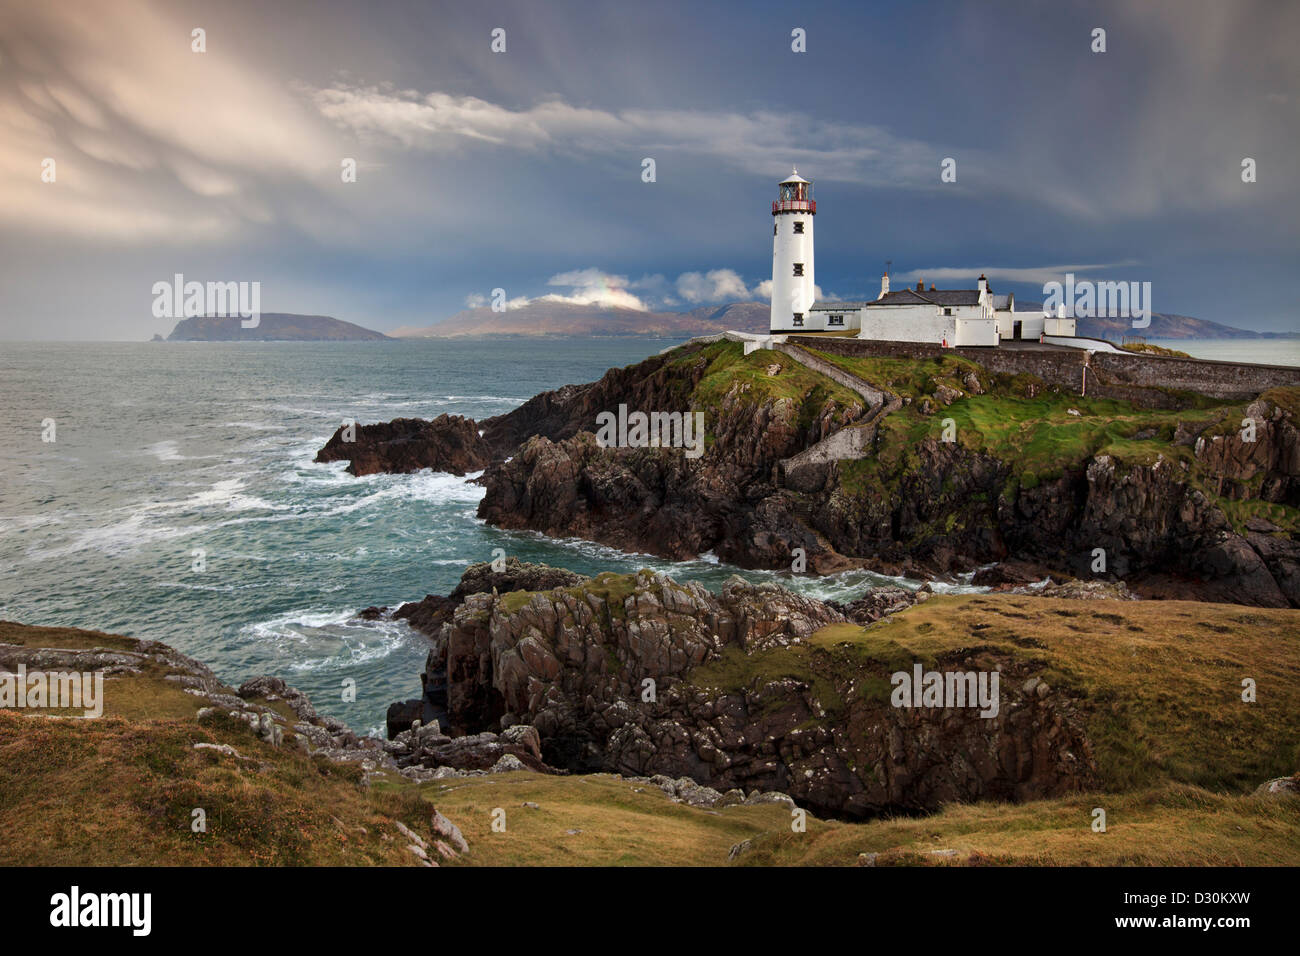 Stormy day at Fanad Head Lighthouse in County Donegal. Stock Photo